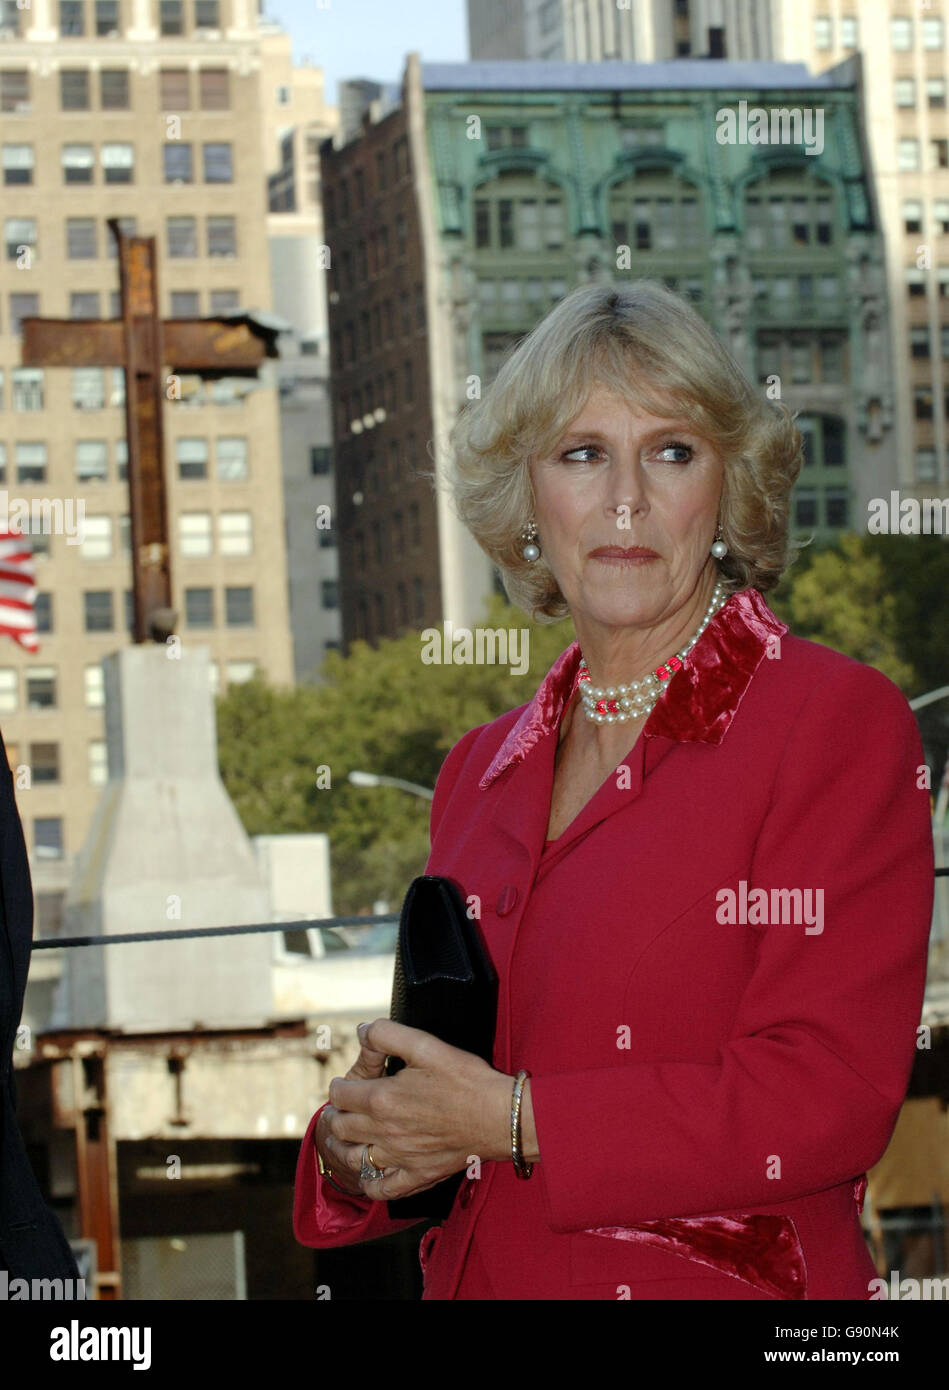 The Duchess of Cornwall during a visit to Ground Zero, the site of the World Trade Centre in New York, Tuesday 1 November 2005. Charles and Camilla touched down in the US at lunchtime and were whisked straight to Ground Zero to pay tribute to the victims of September 11, 2001. Neither had visited the city since the tragedy. Camilla, wearing a pink Italian wool crepe jacket and dress by British designer Roy Allen, placed a bouquet at a memorial overlooking the site. See PA Story ROYAL Charles. PRESS ASSOCIATION Photo. Photo credit should read: Arthur Edwards/PA/Pool/The Sun Stock Photo